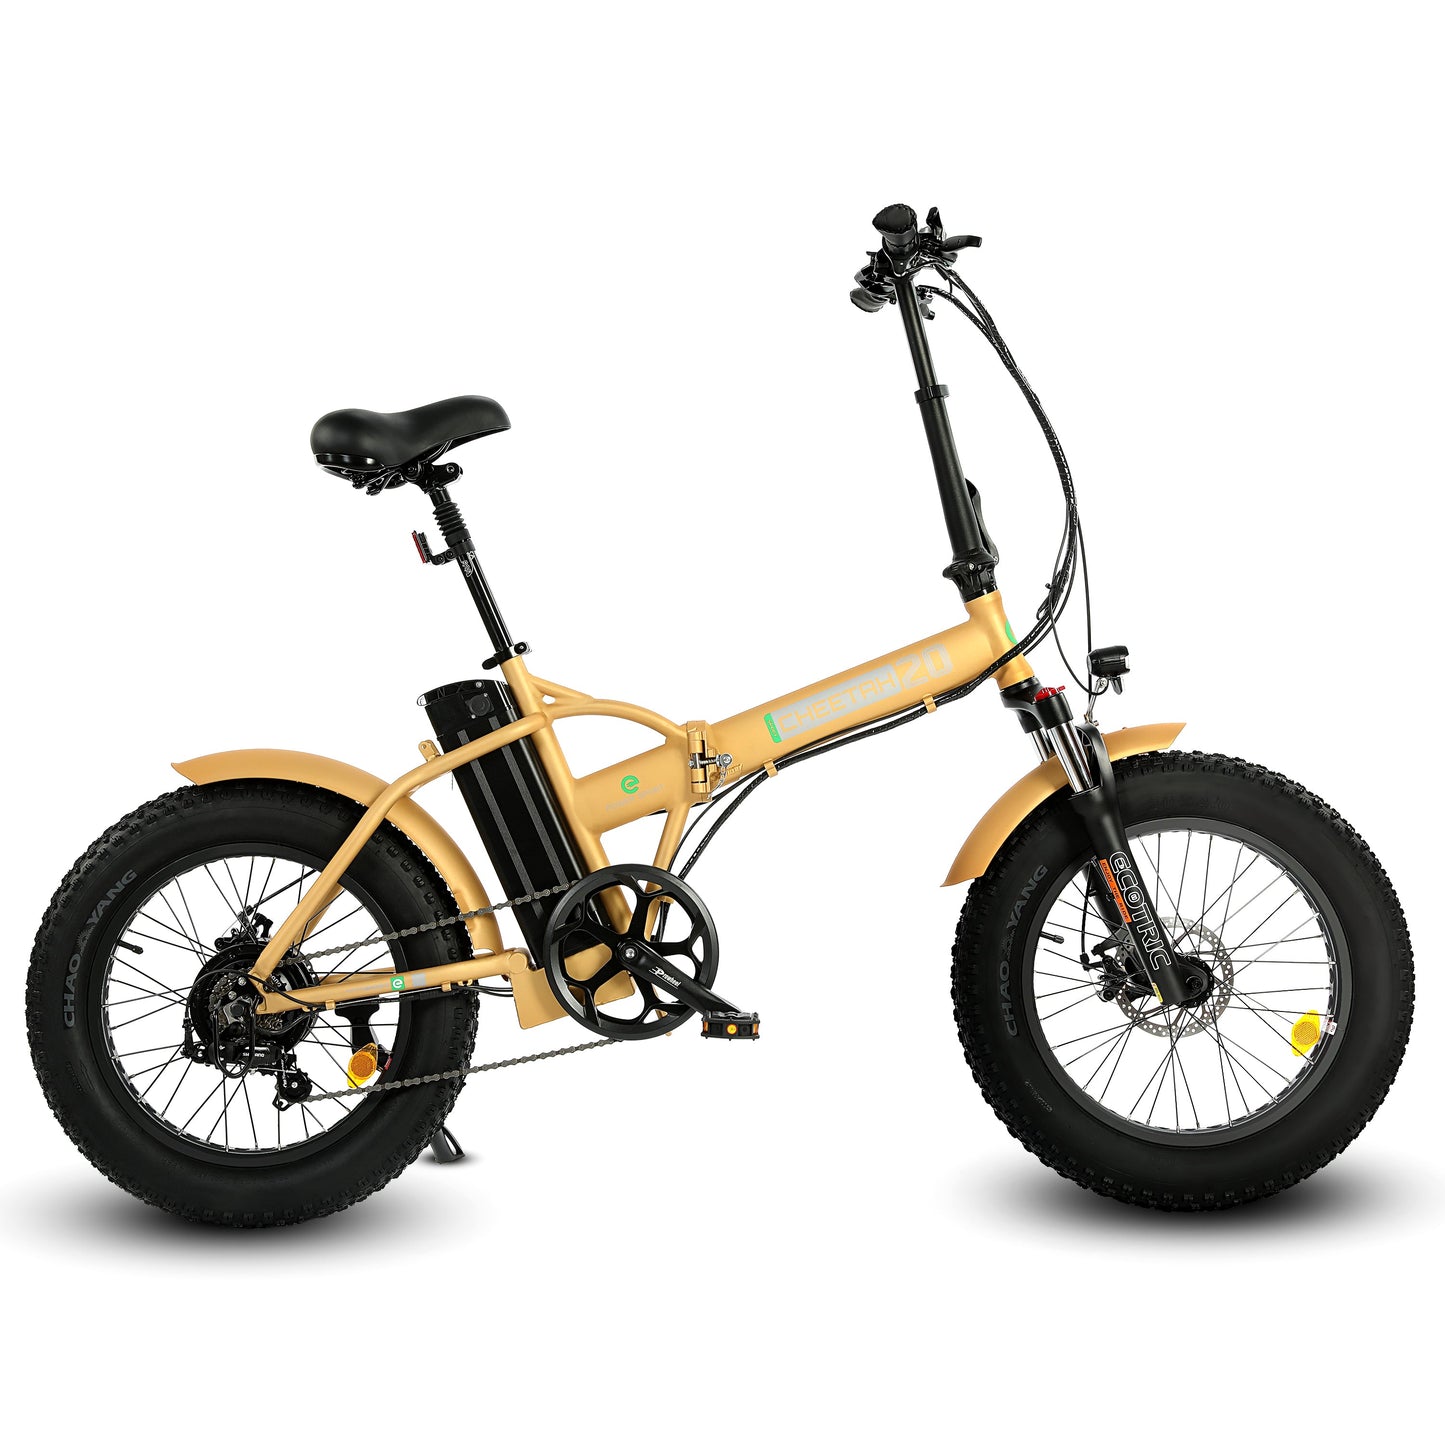 Ecotric 48V Portable Folding Fat Tire Long Distance eBike 500W Brushless Motor For Long Lifespan - w/ LCD Display For Leisure, Commuters, and Trail Riders